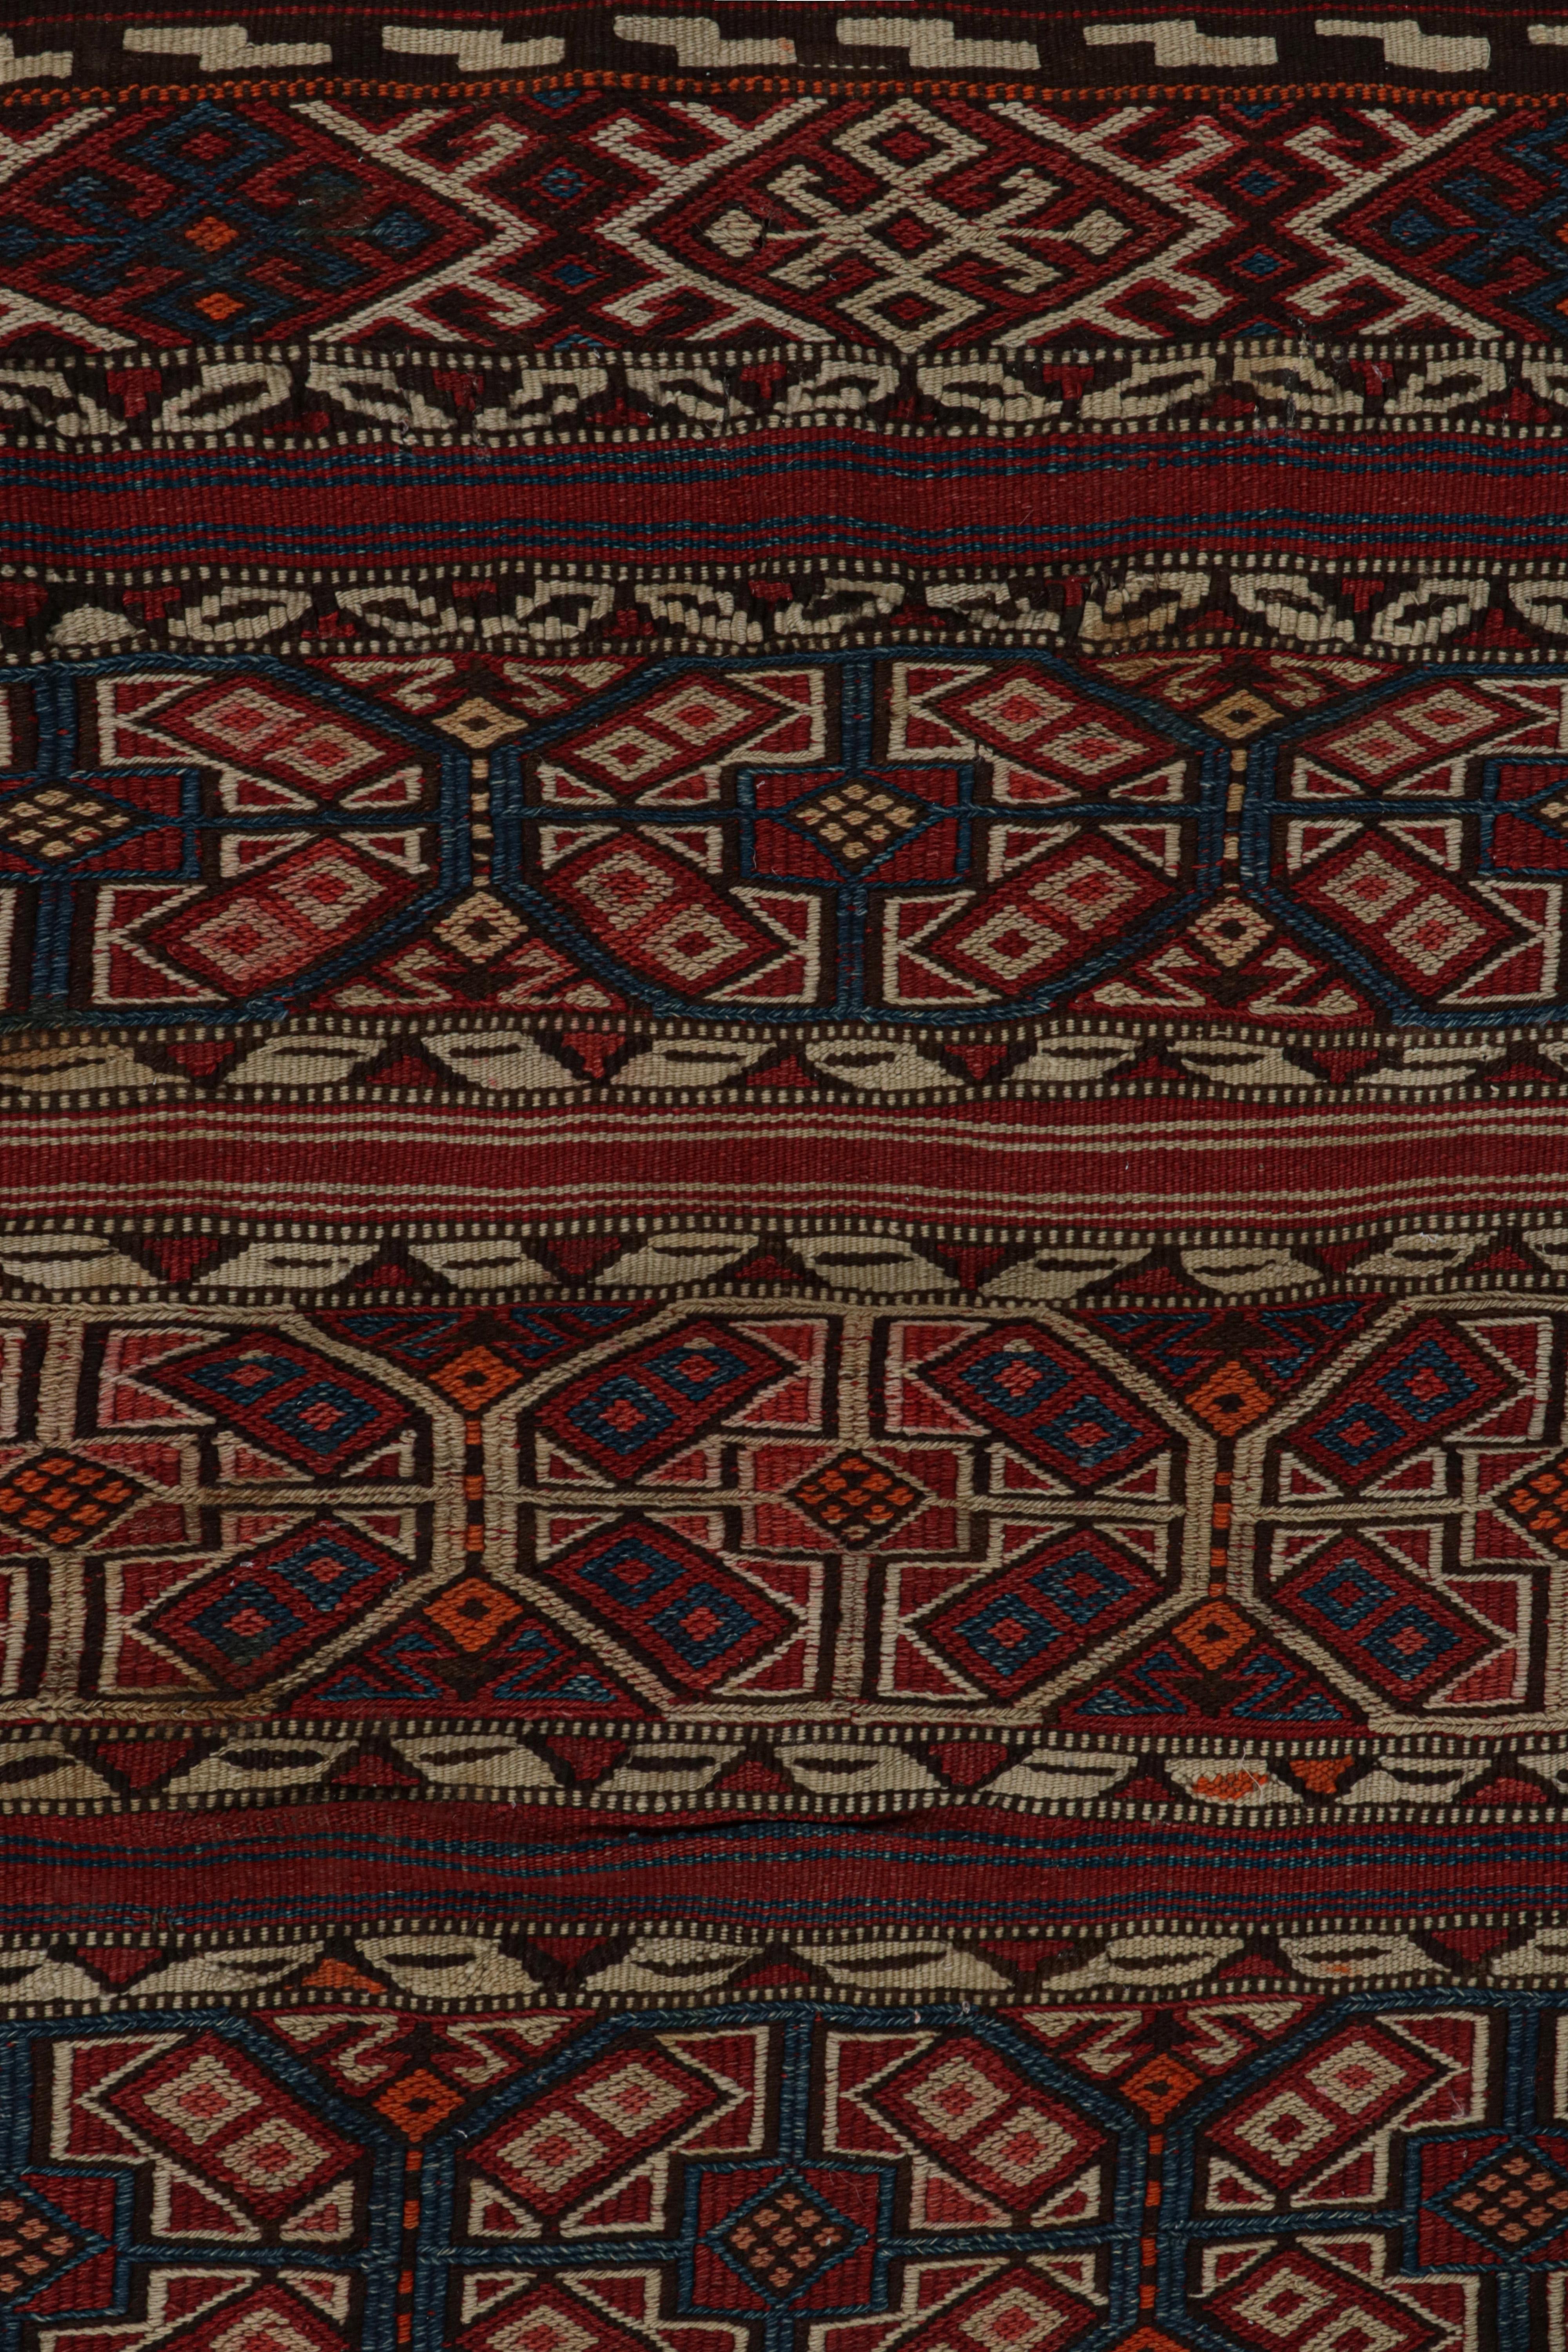 Late 19th Century Antique Tribal Bag & Flatweave Textile with Geometric Patterns, from Rug & Kilim For Sale